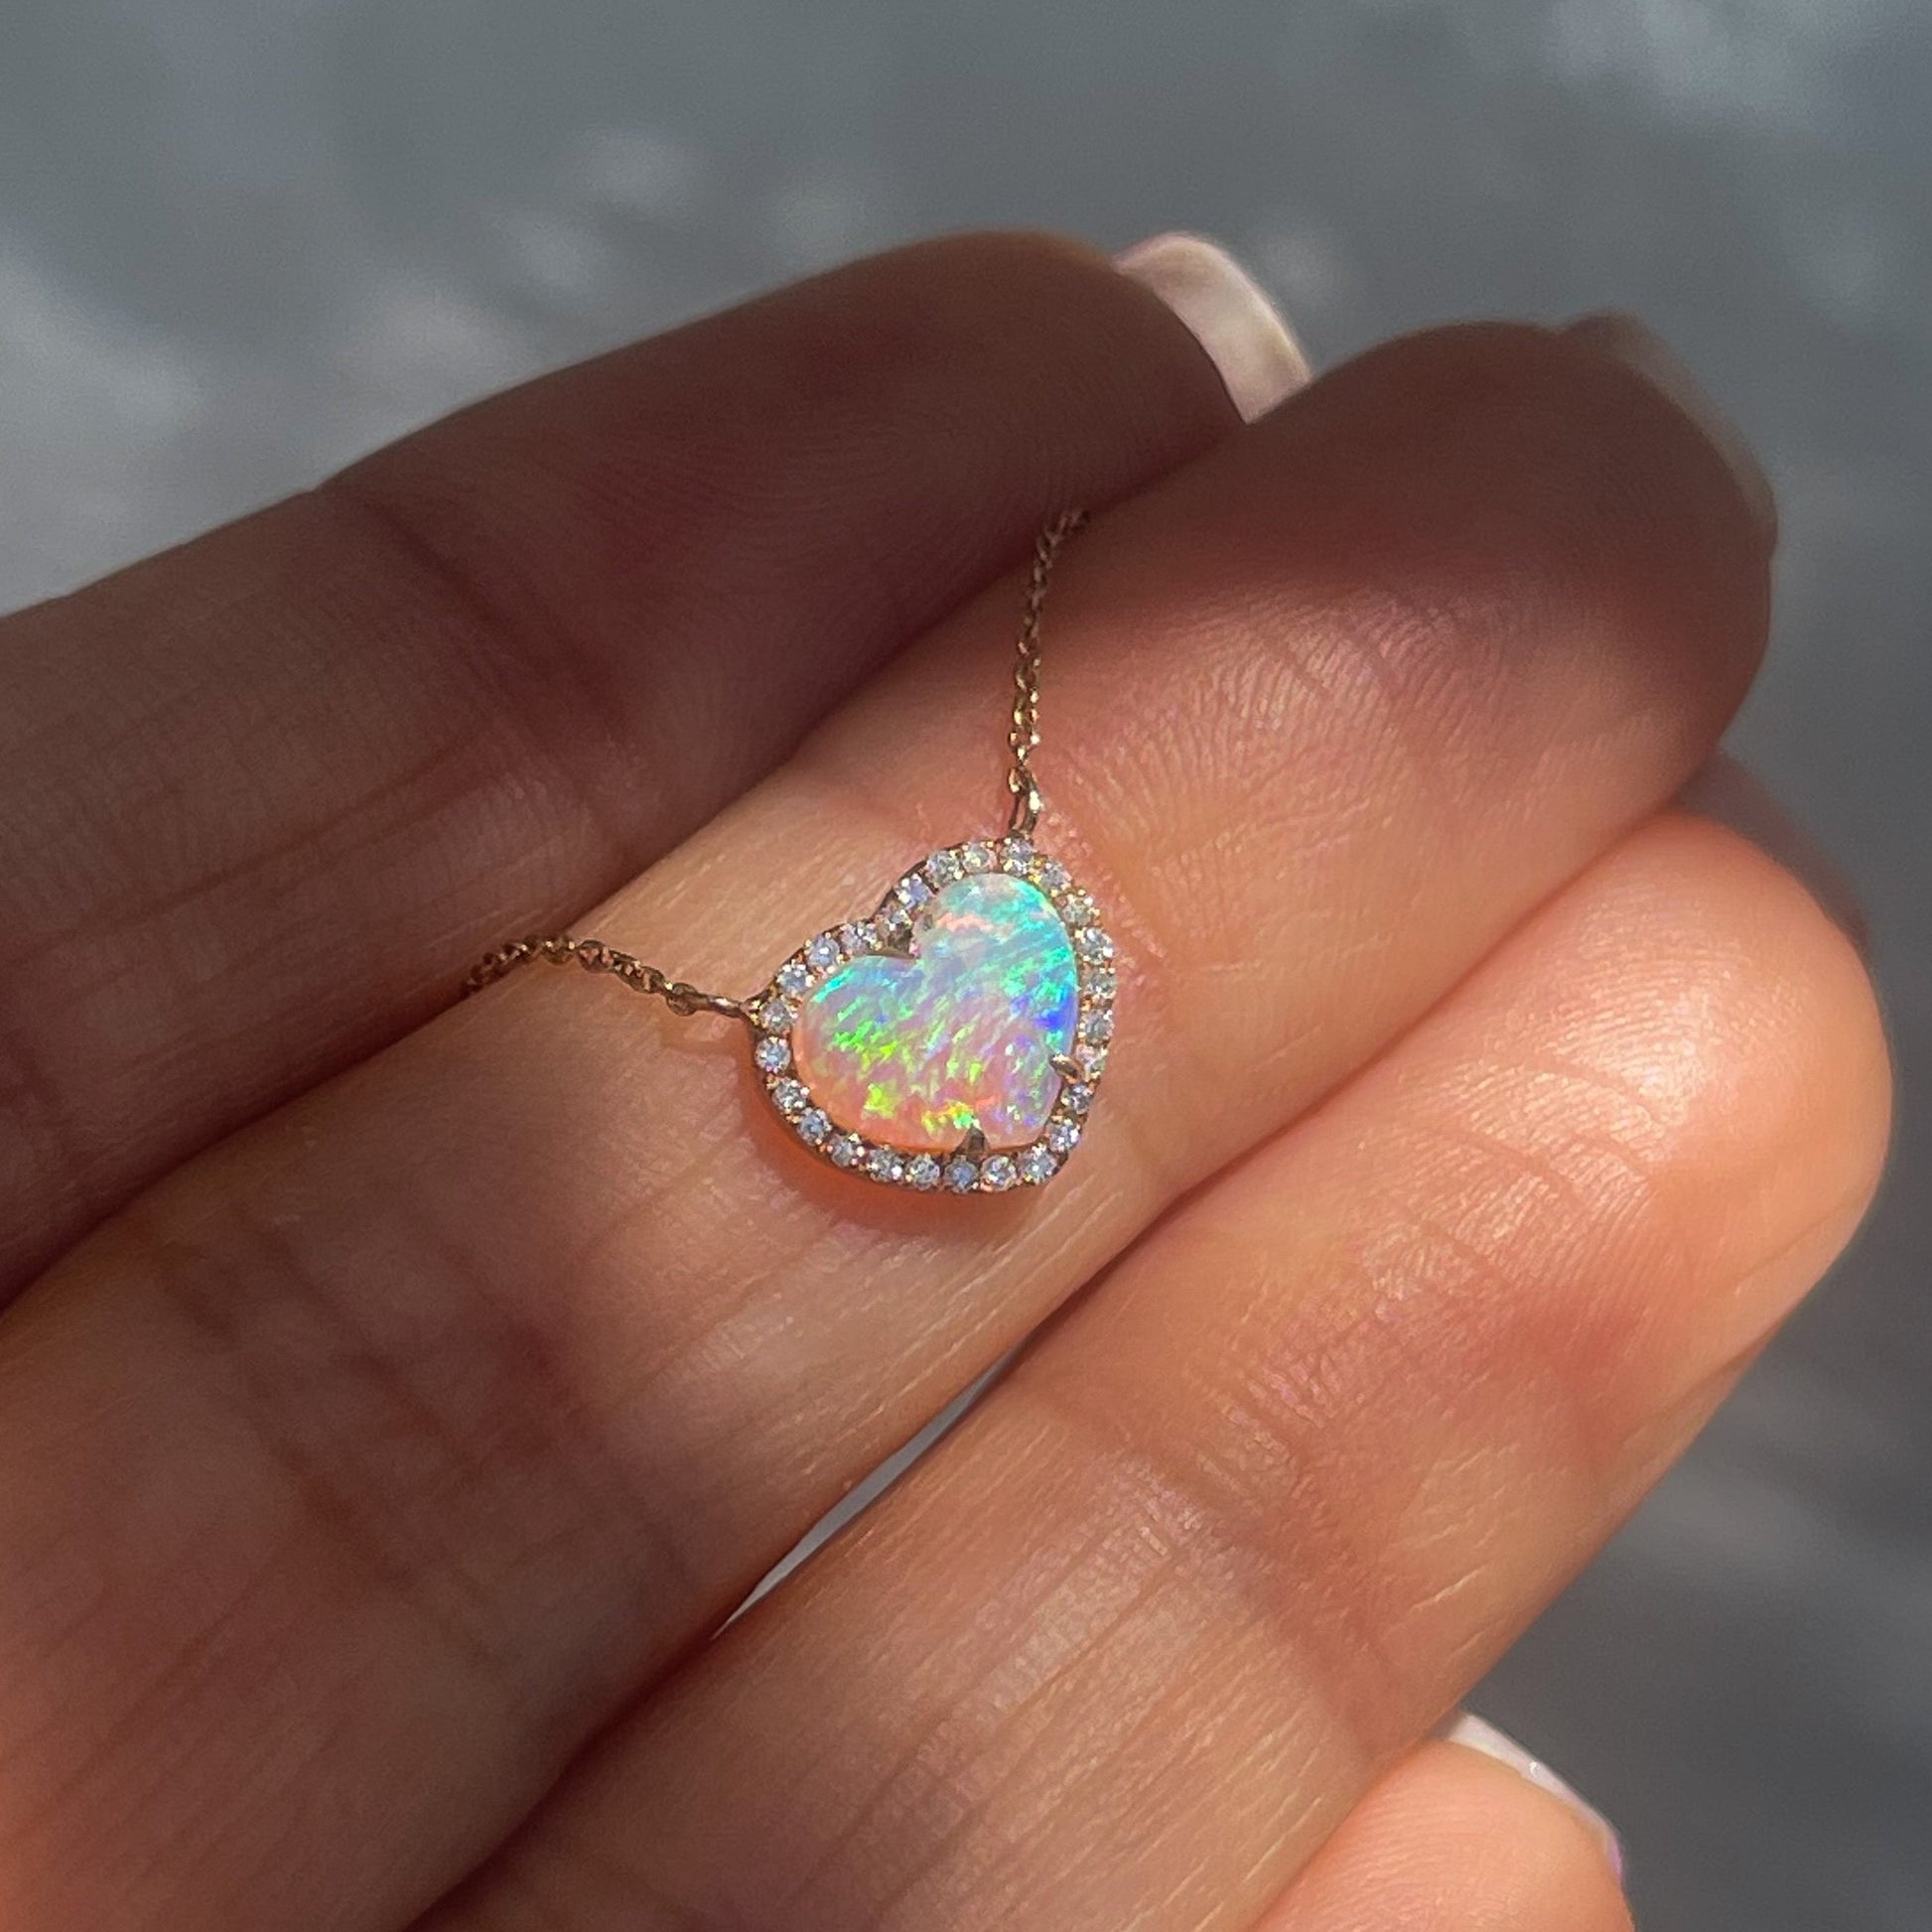 An Opal Heart Necklace by NIXIN Jewelry shown on top of a hand. The rose gold opal necklace is multicolored and has diamonds.